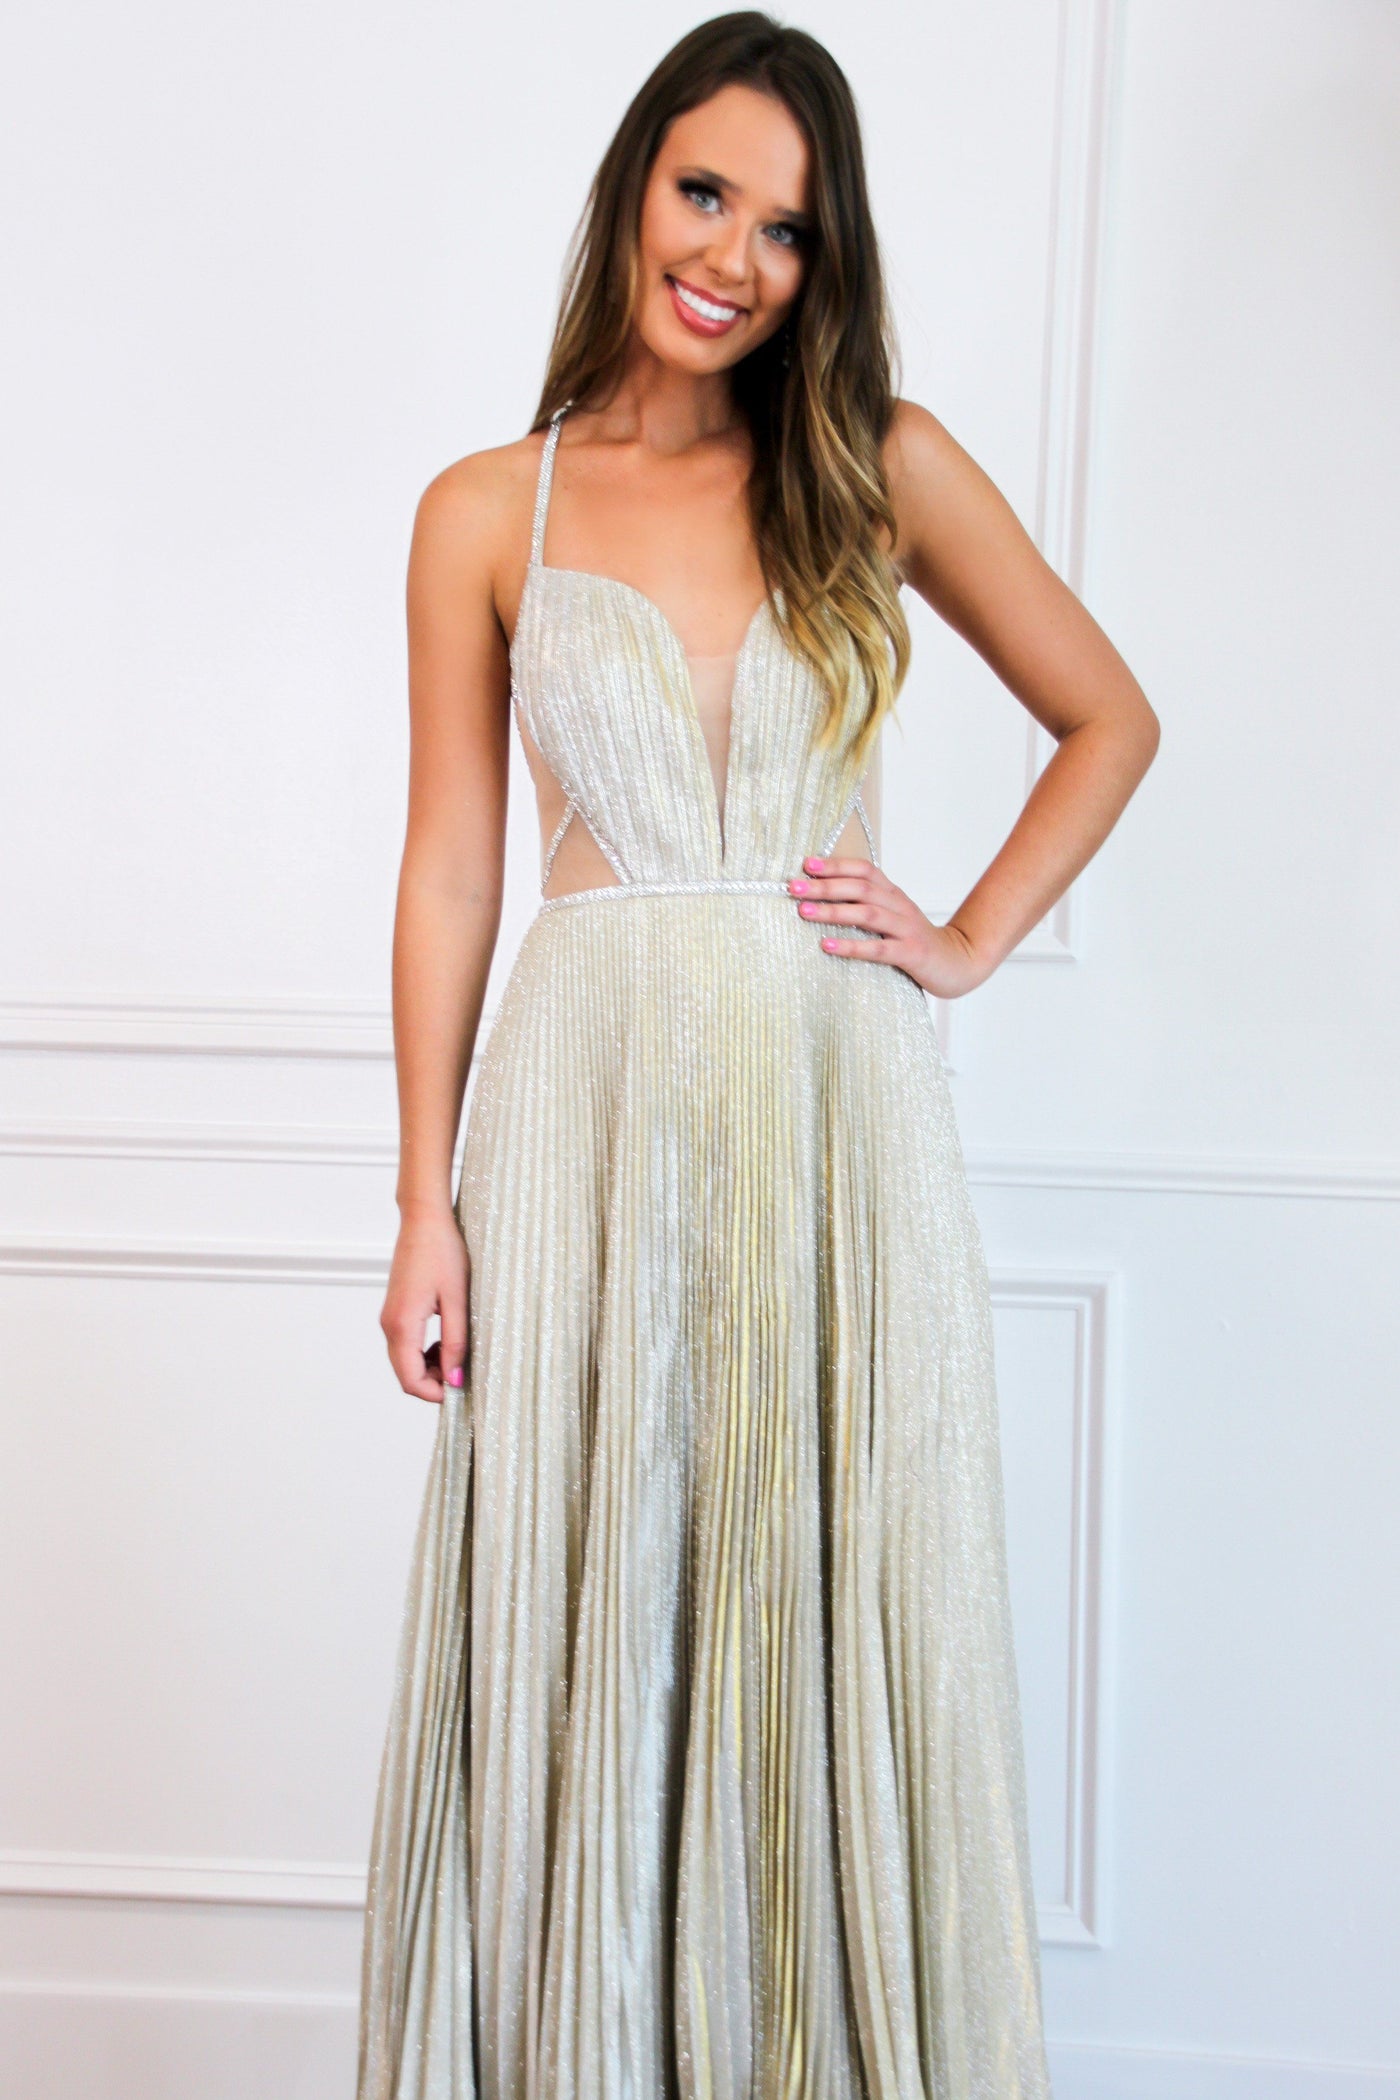 Mermaid Dreams Formal Dress: Gold Iridescent - Bella and Bloom Boutique